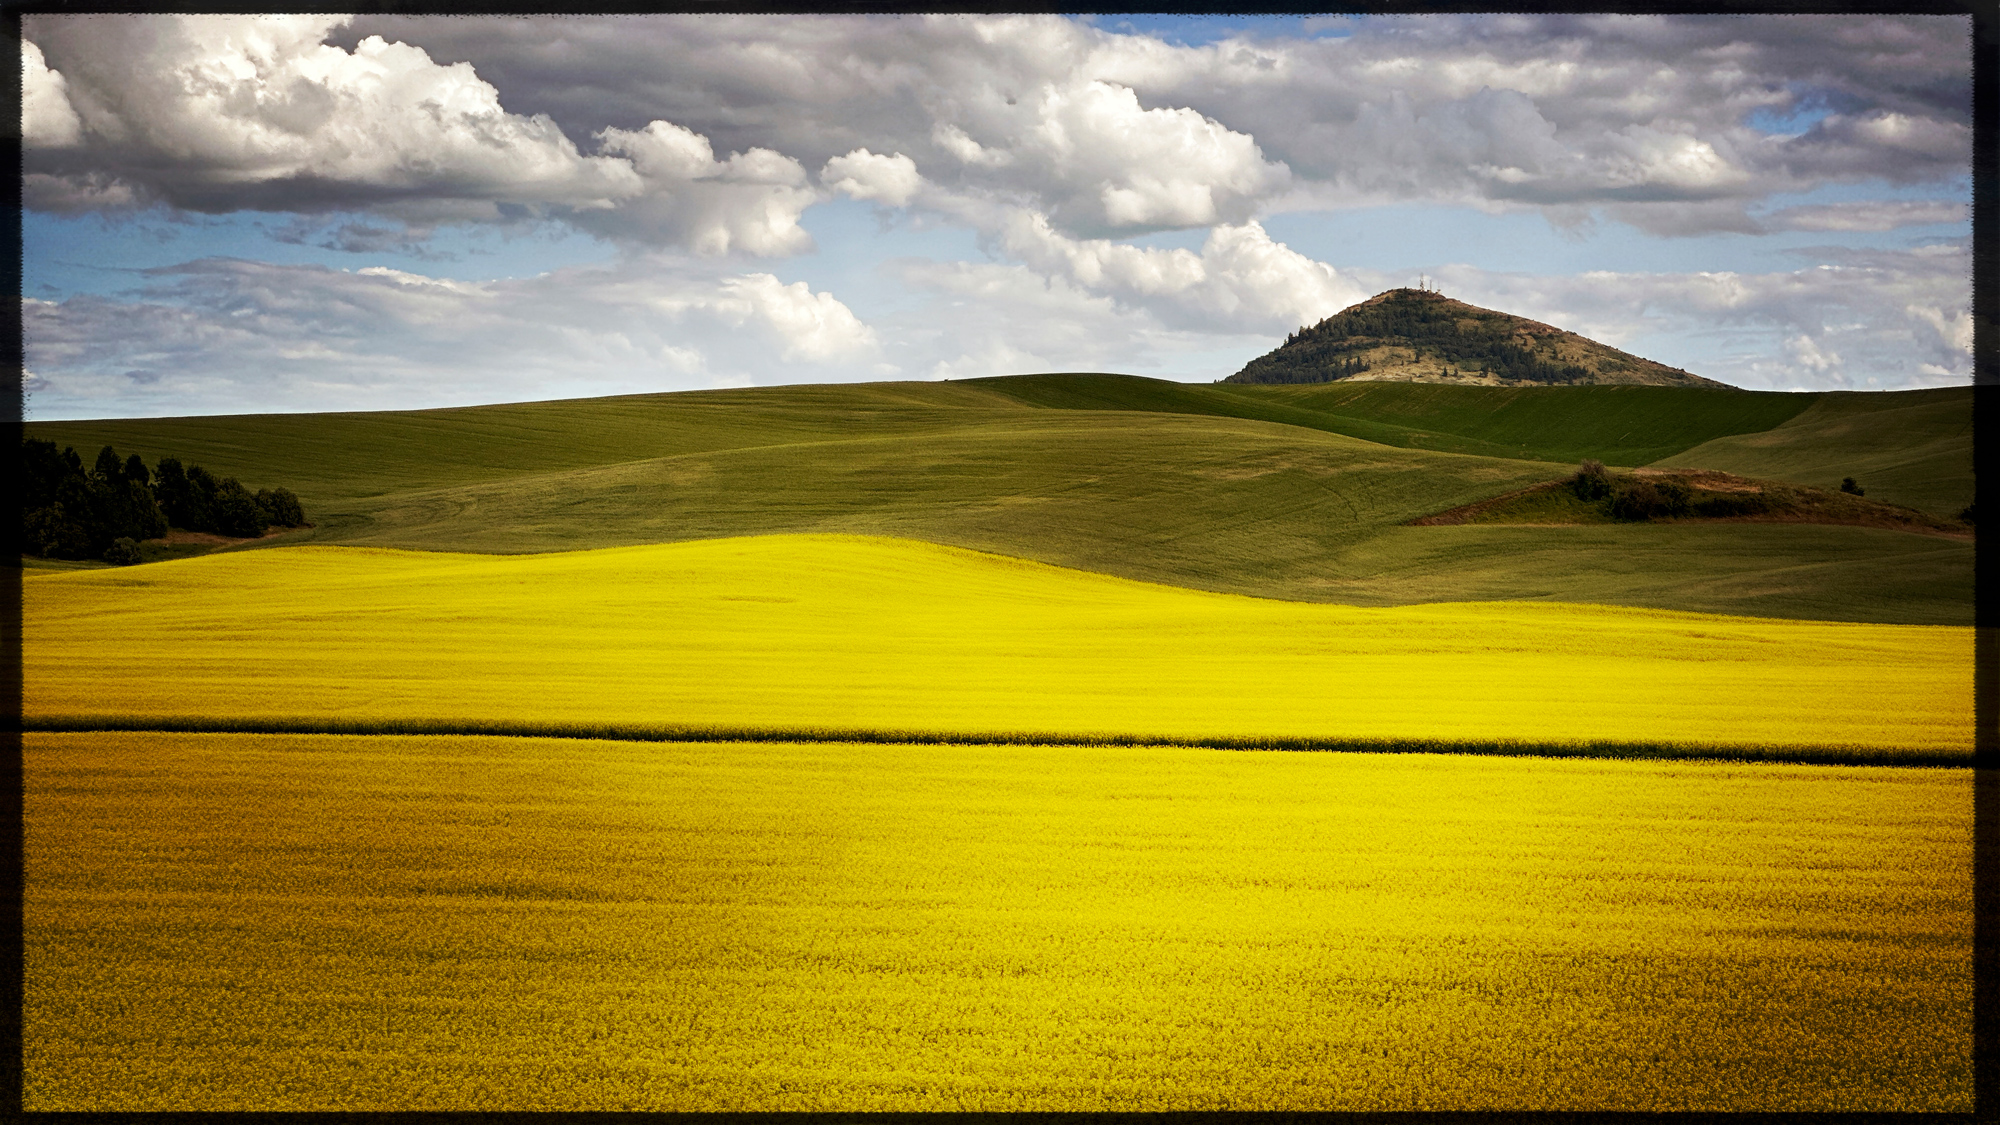 Canola field with Step Toe Butte in the background.